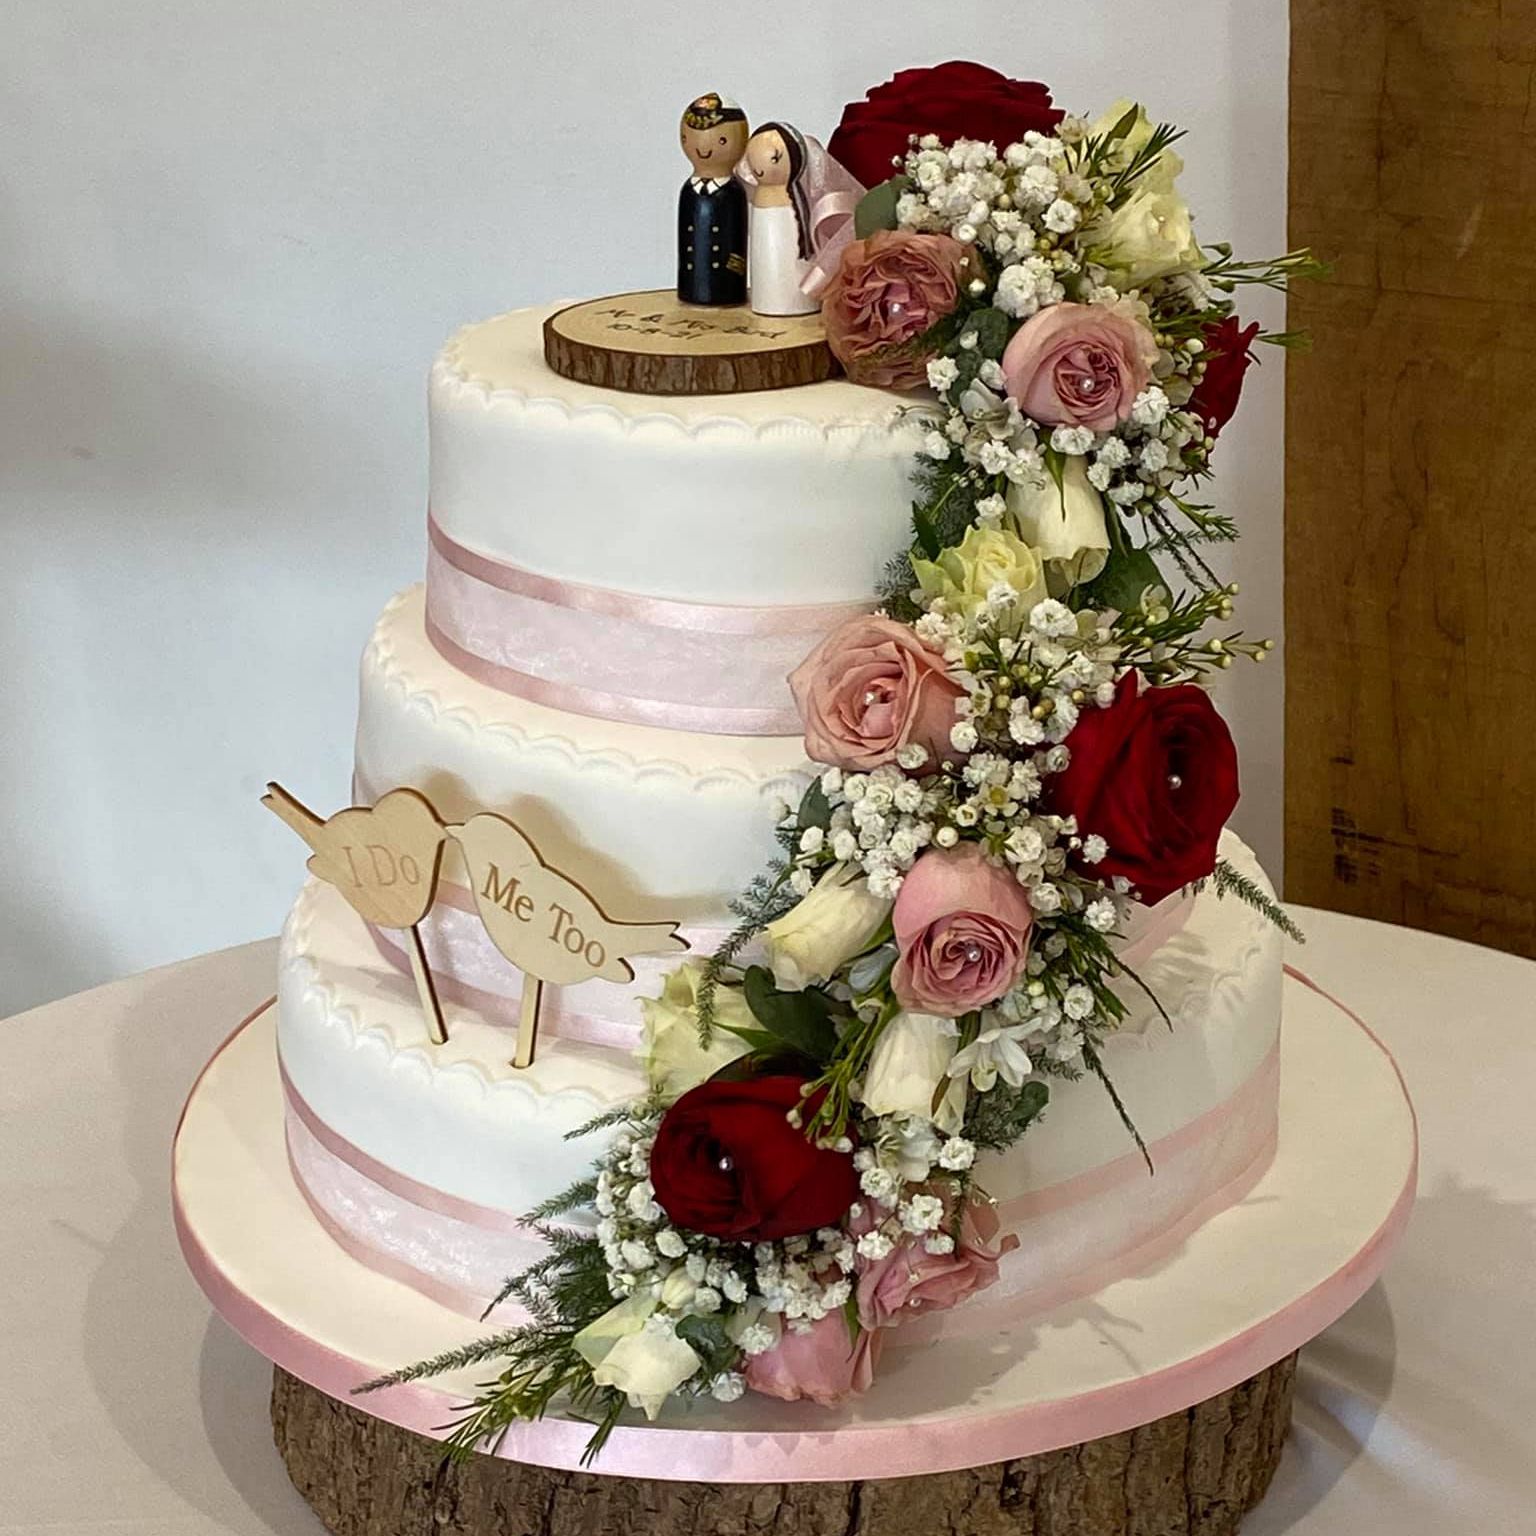 a wedding cake with flowers and a bride and groom figurine on top .